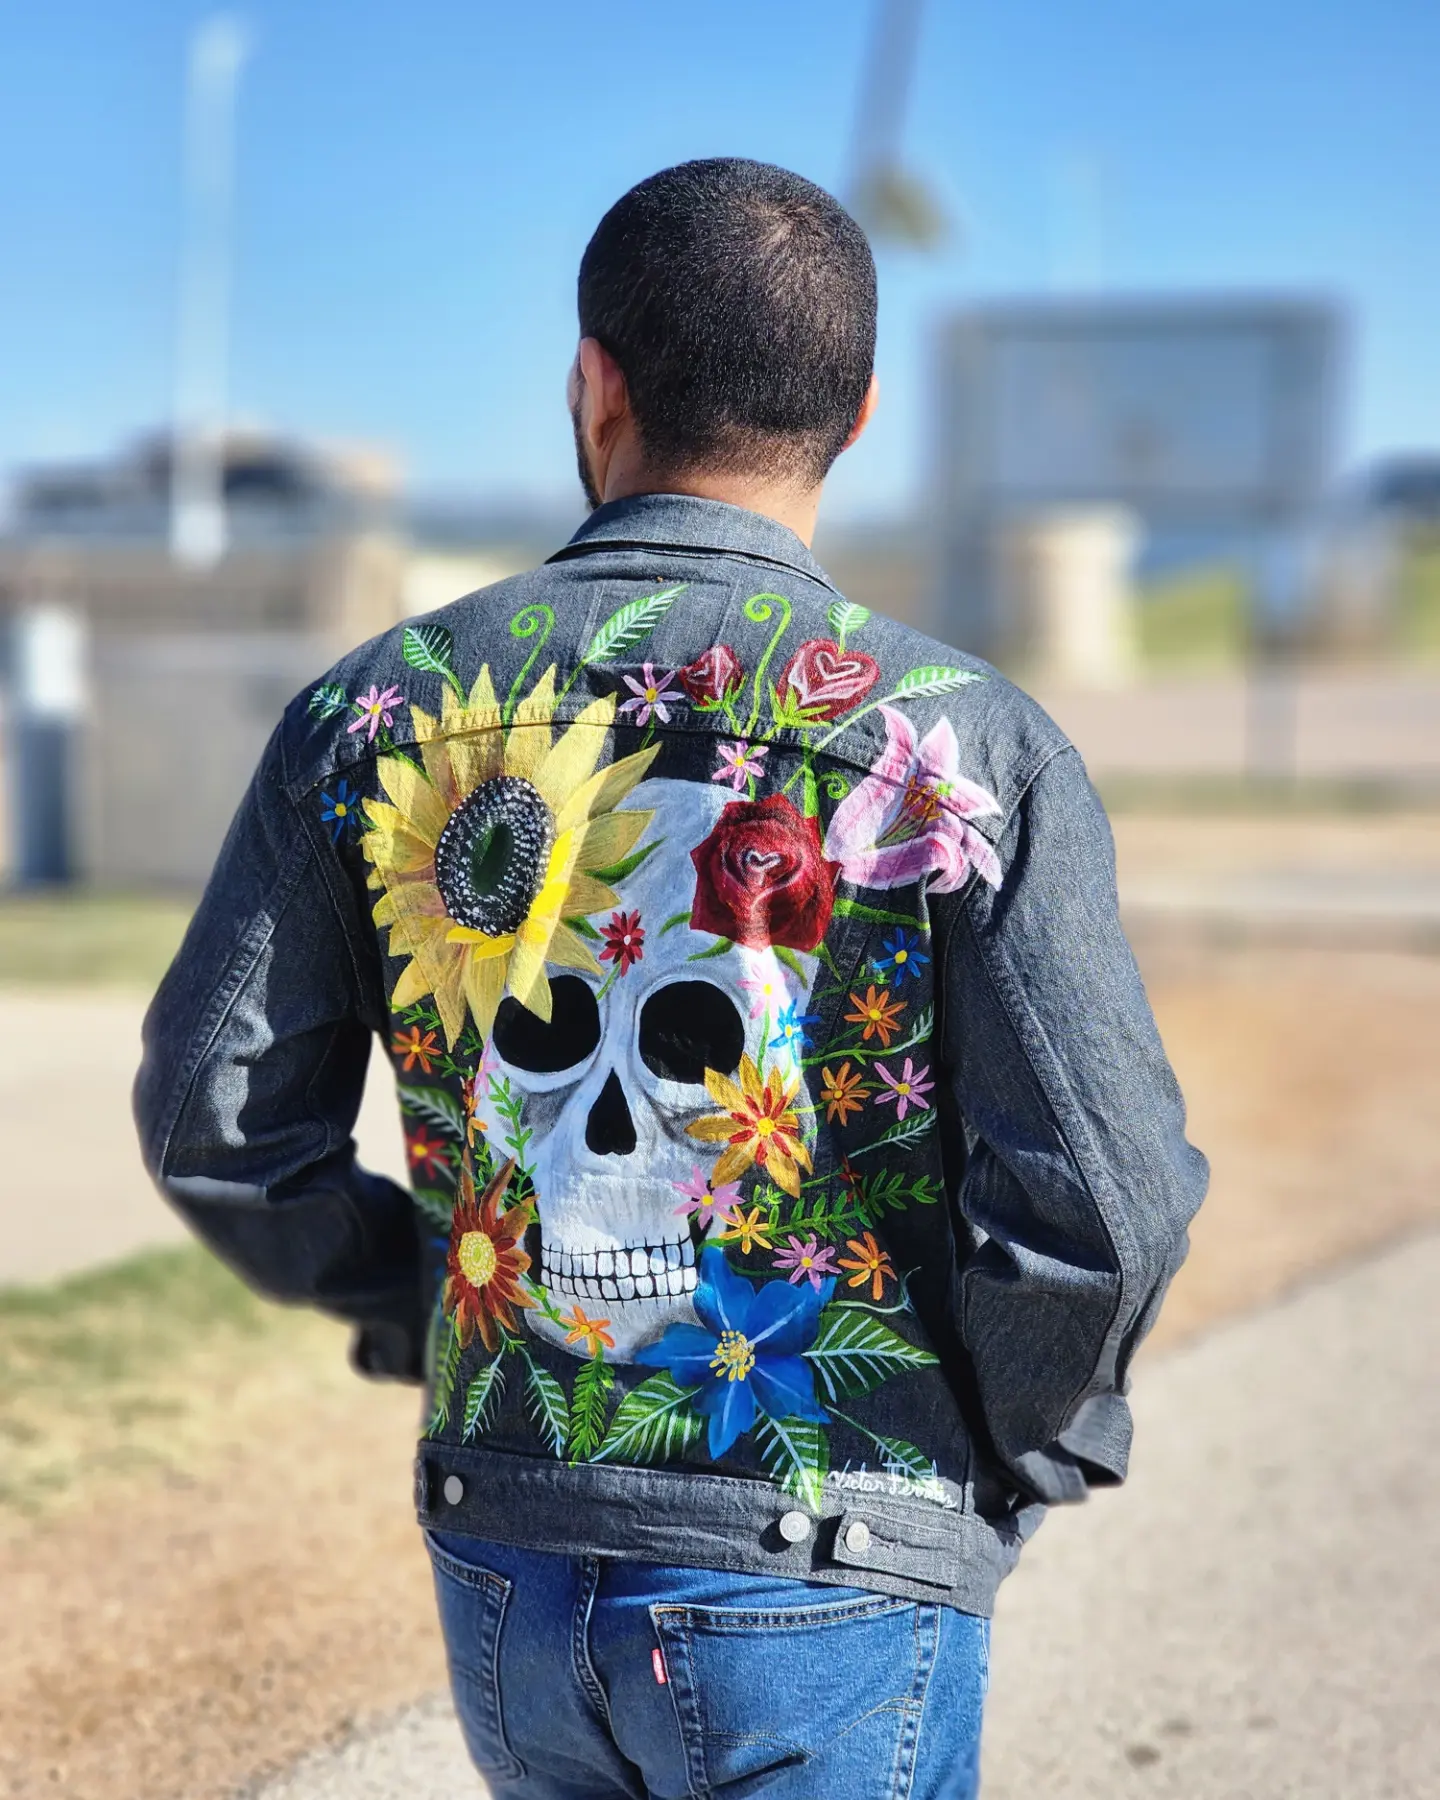 This garment is one-of-a-kind hand-painted brand new Levi's denim jacket with acrylic textile paint. This beautiful jacket has been heat-pressed so the jacket is machine washable.